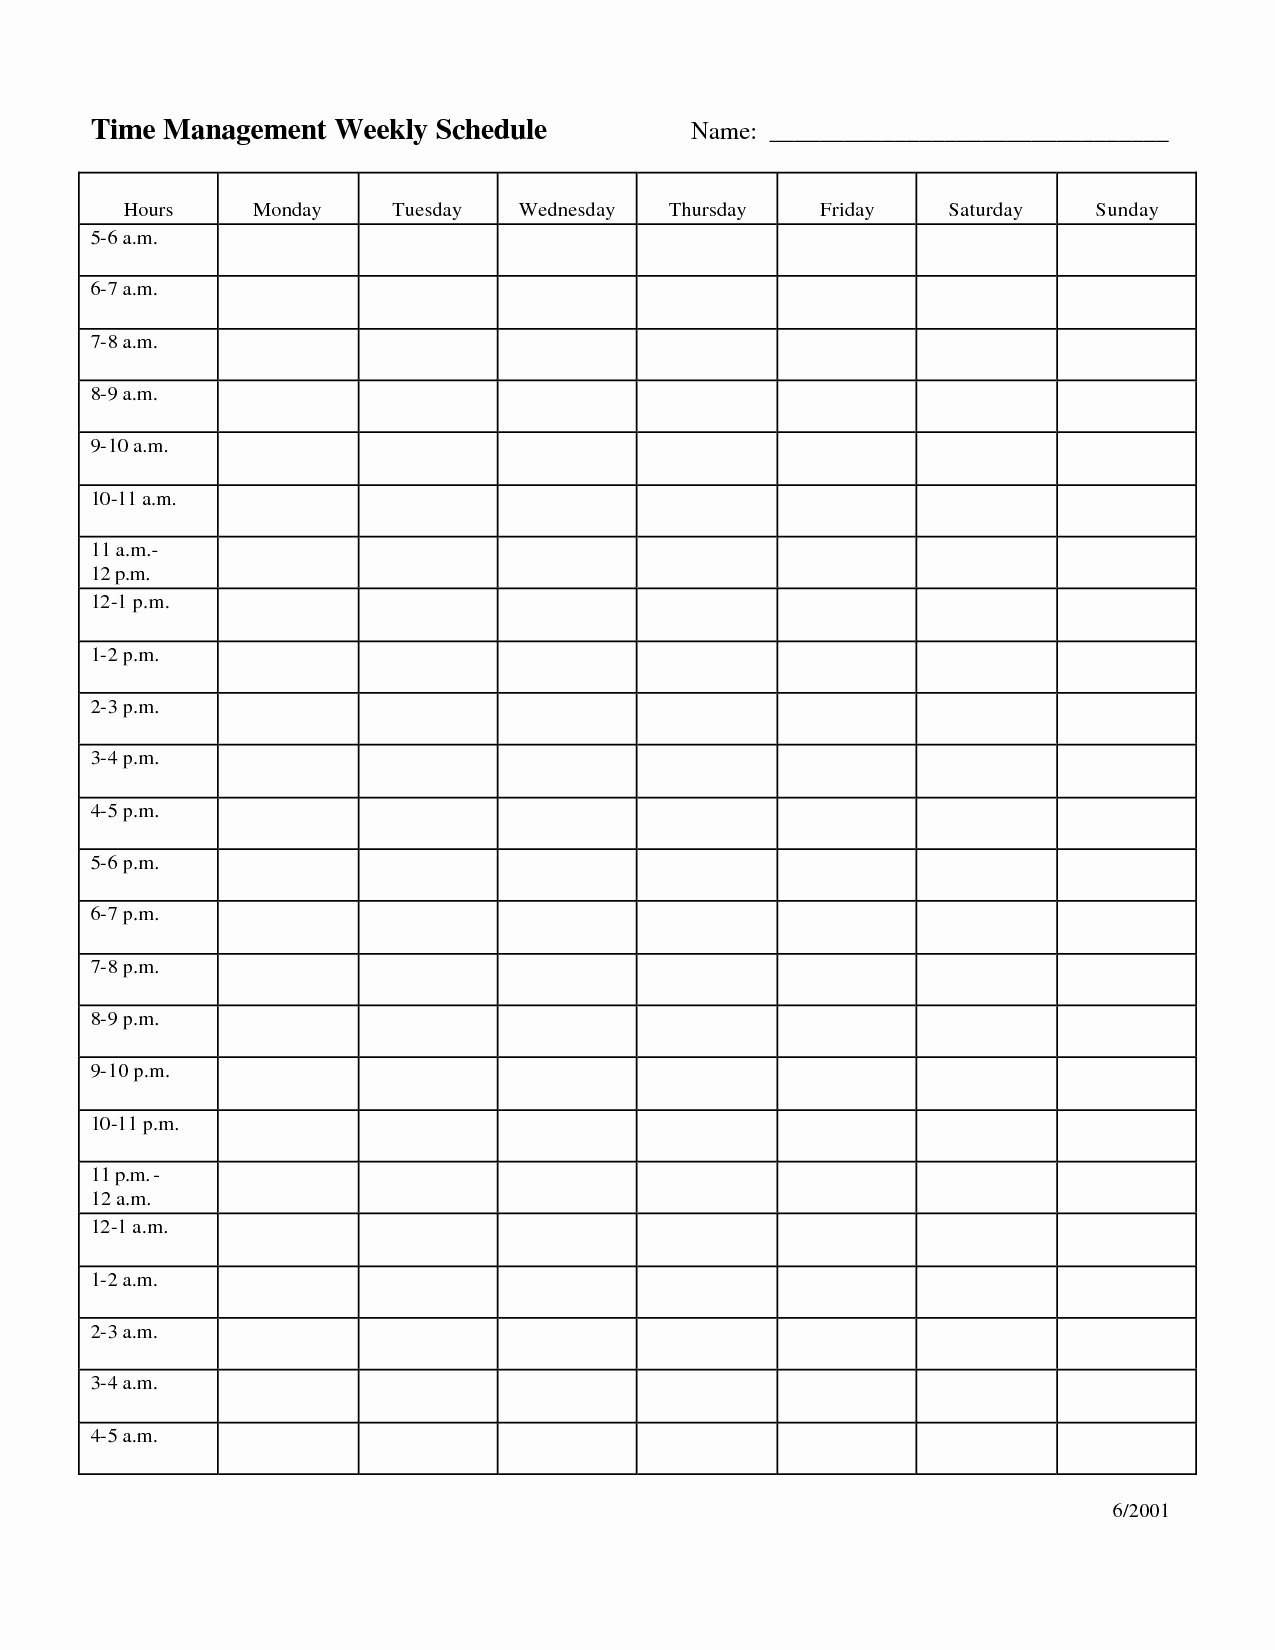 Time Management Schedule Template New Pick Blank Weekly Schedule with Time Slots ⋆ the Best